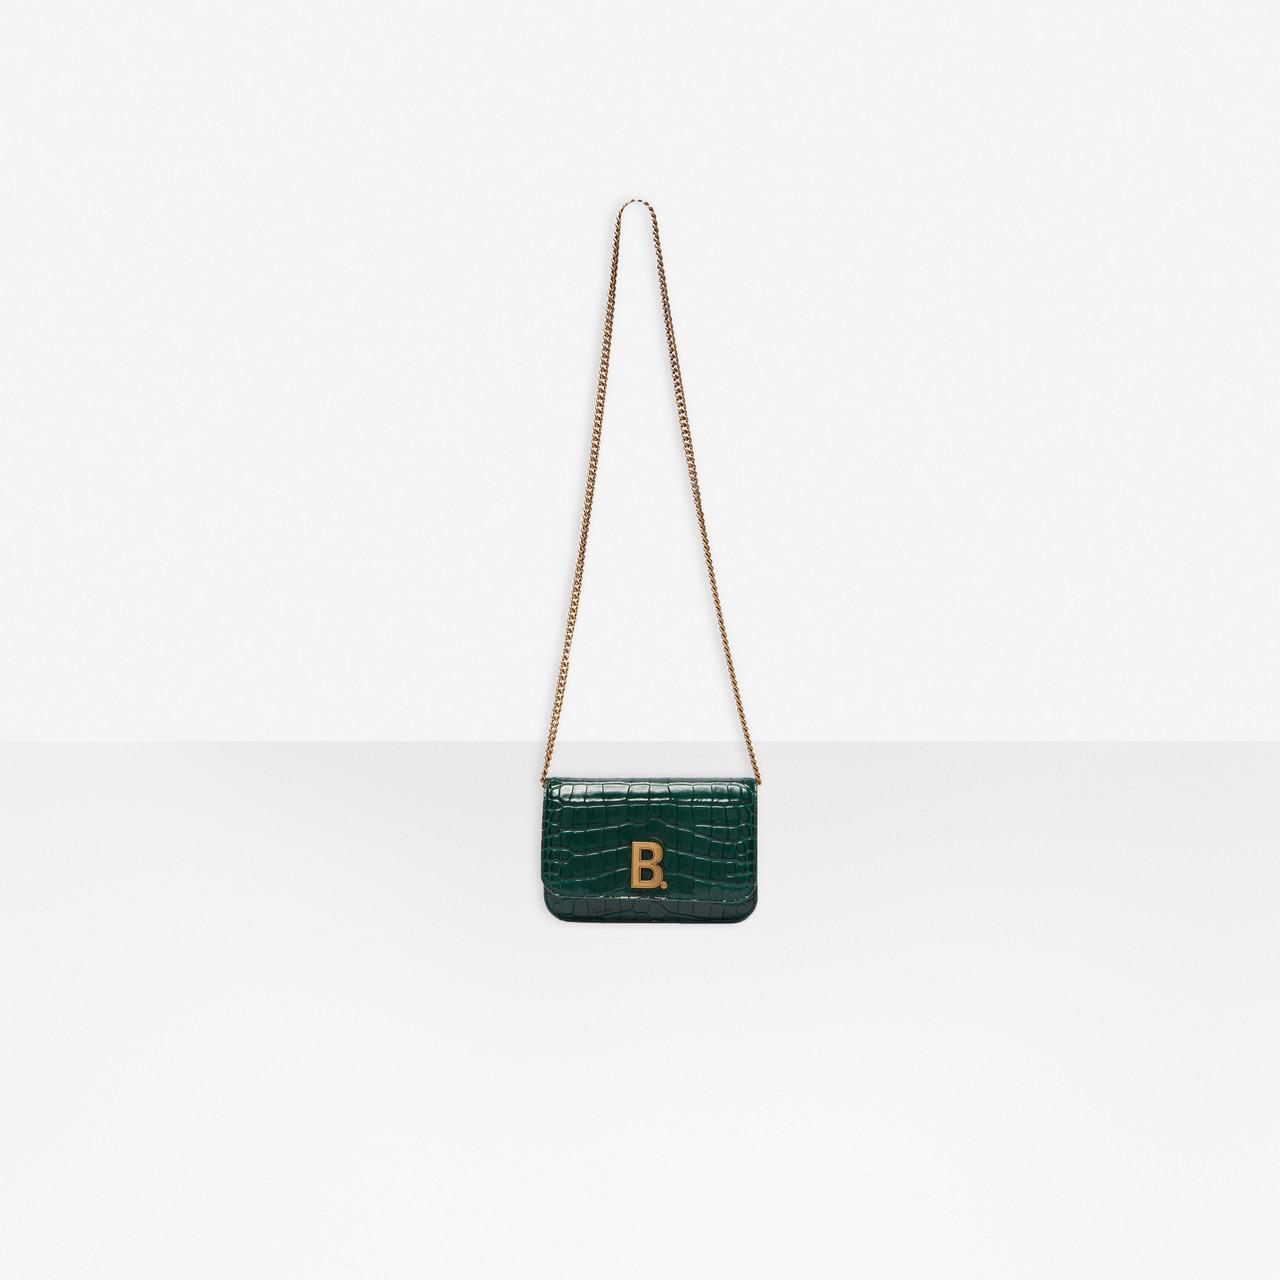 Balenciaga Leather B. Wallet On Chain in Forest Green (Green) - Lyst